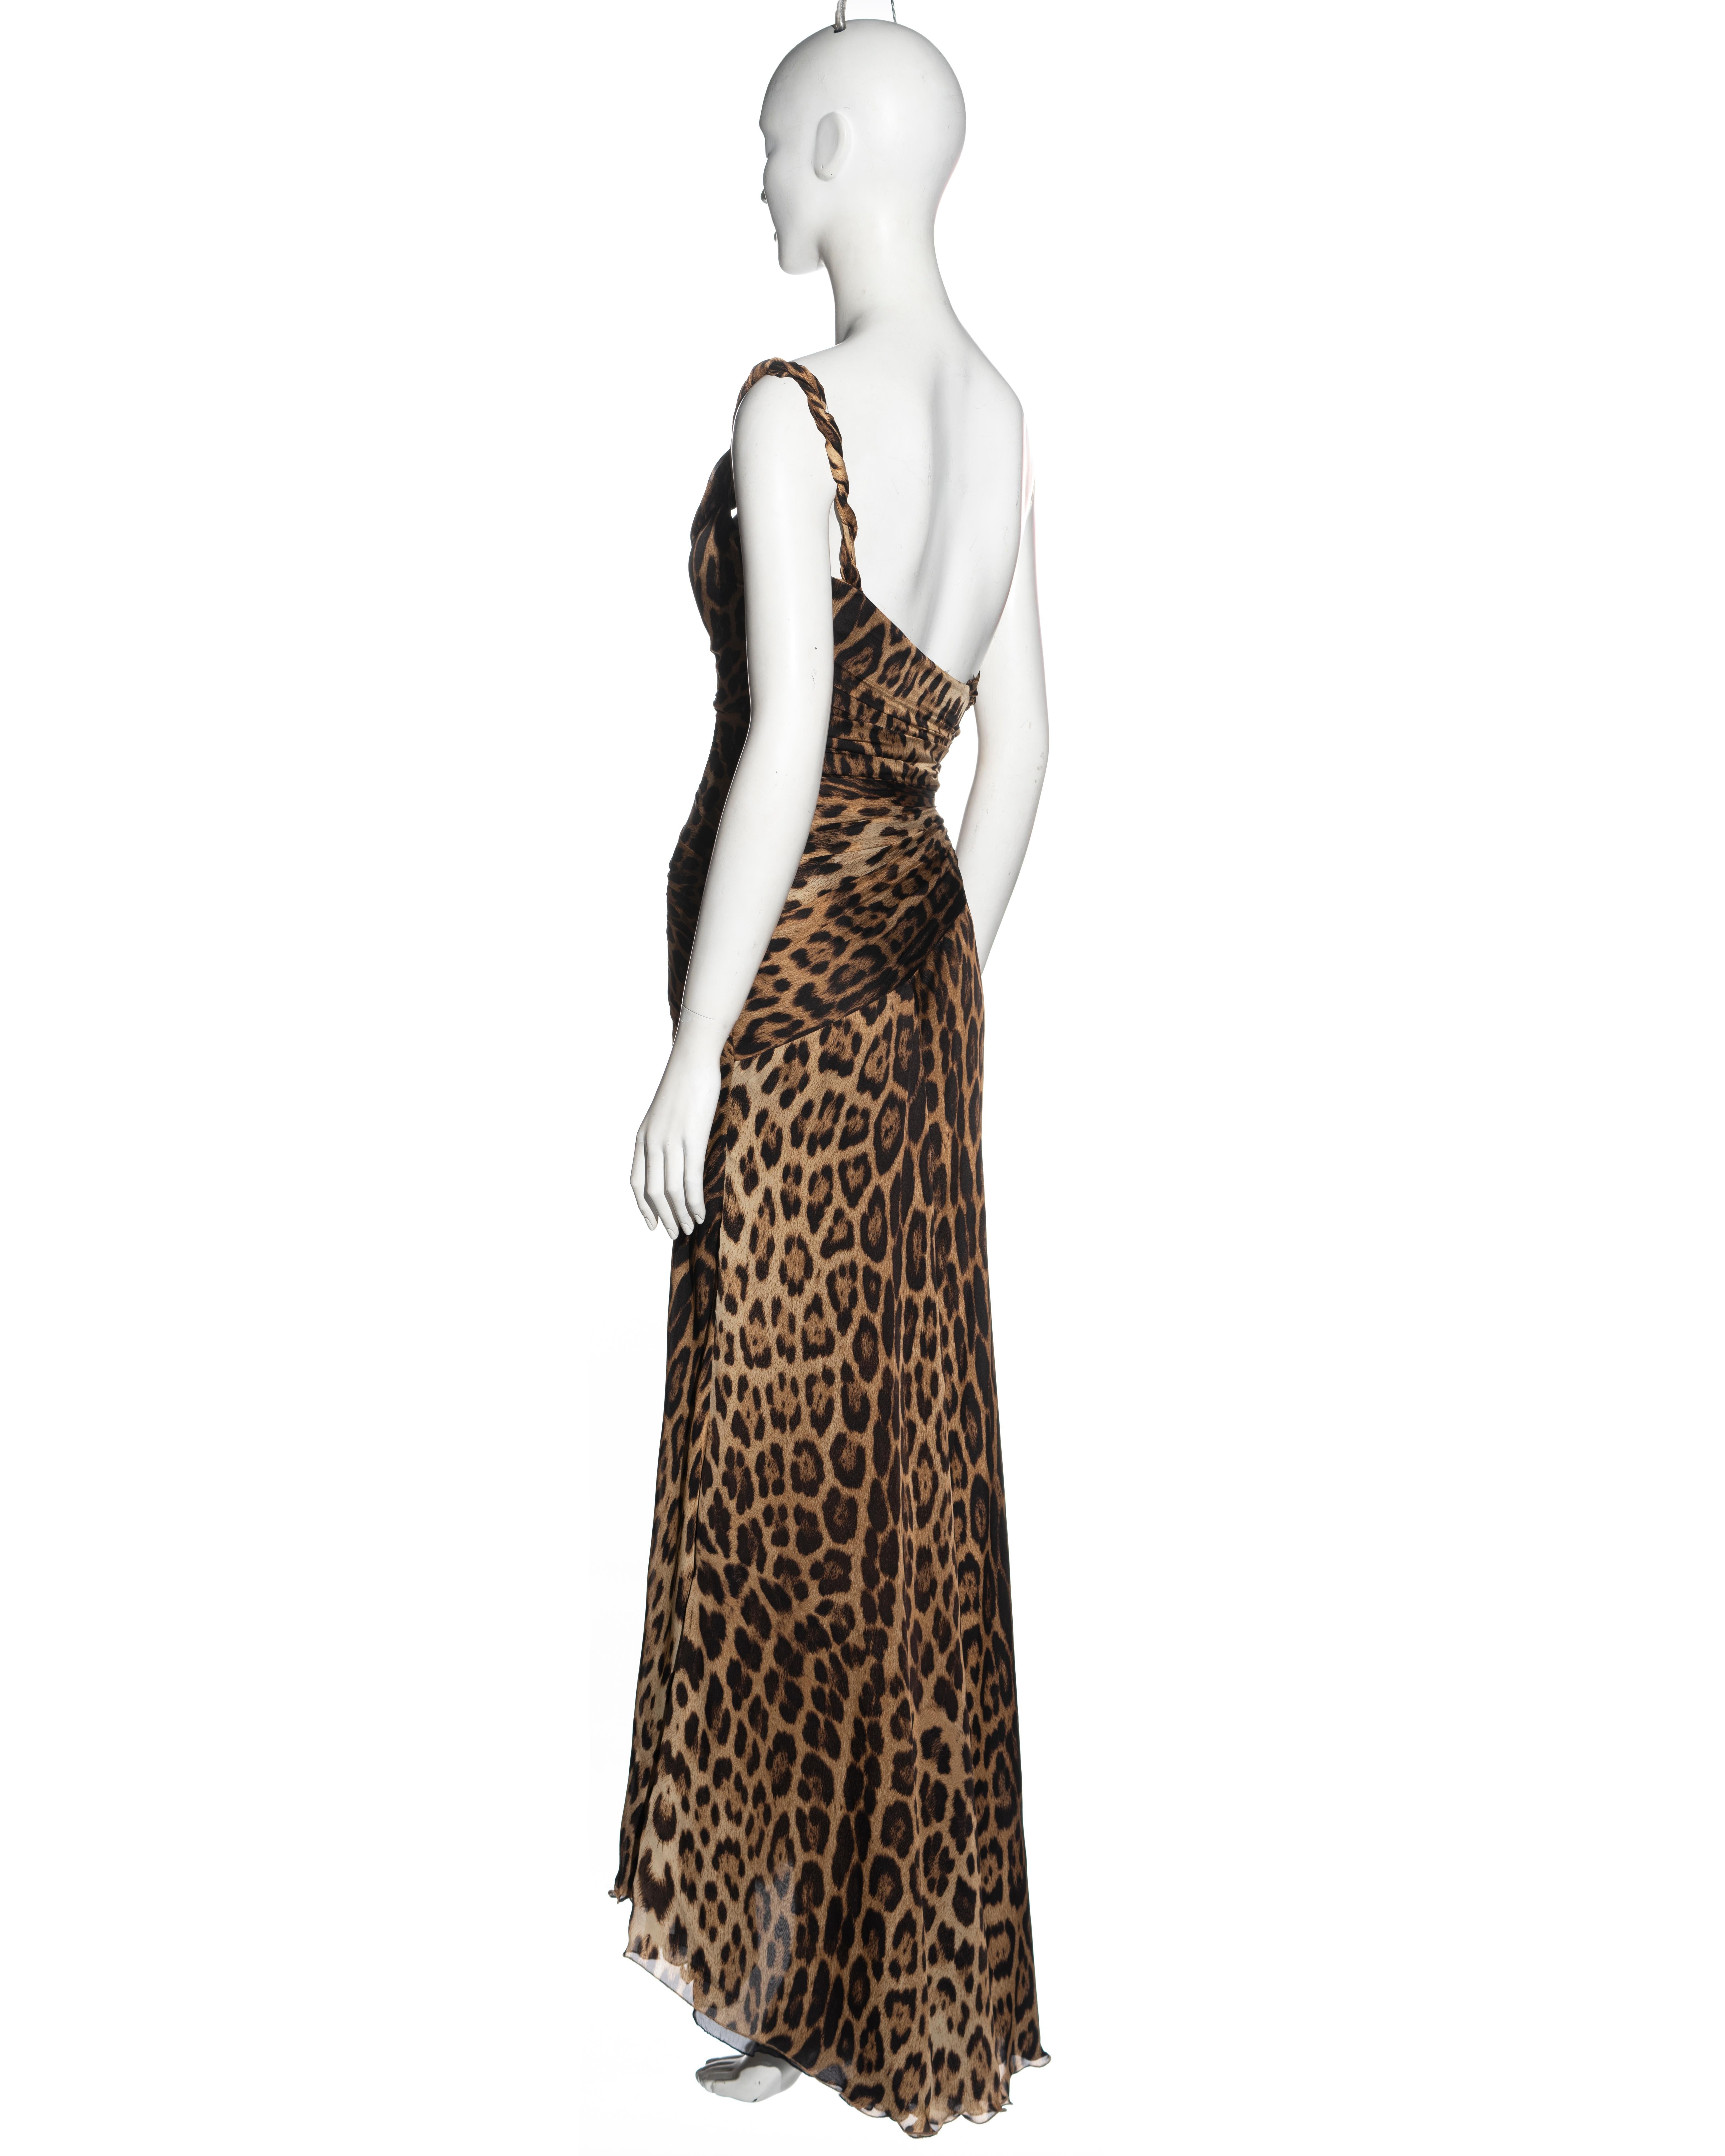 Roberto Cavalli leopard print silk evening dress with built-in corset, fw 2006 For Sale 3